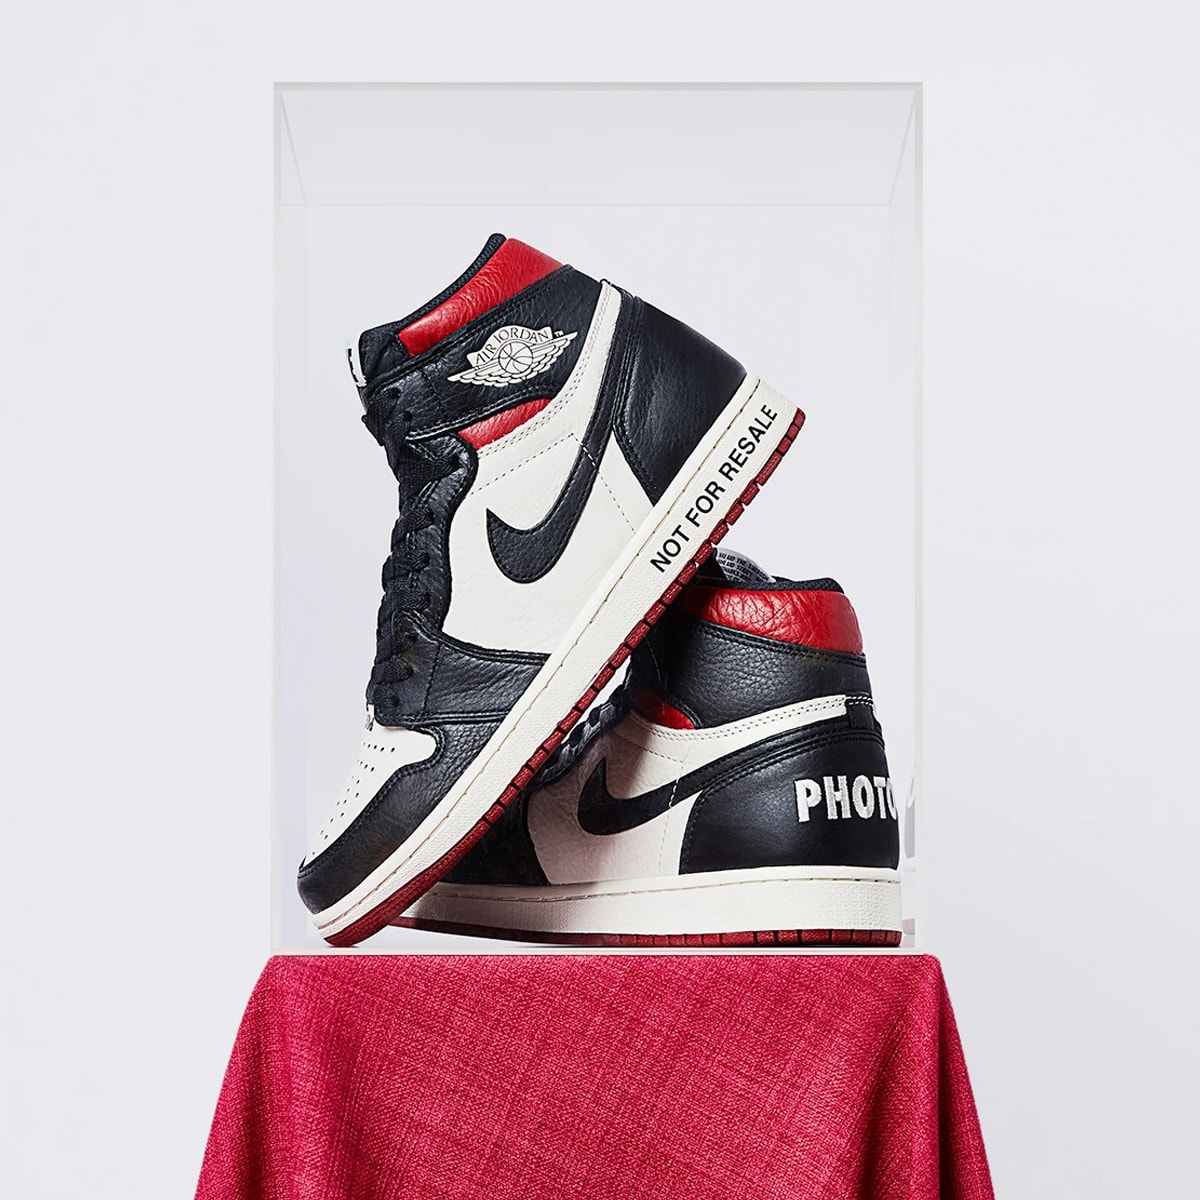 Nike Air Jordan 1 'Not For Resale' - Register Now on END. Launches